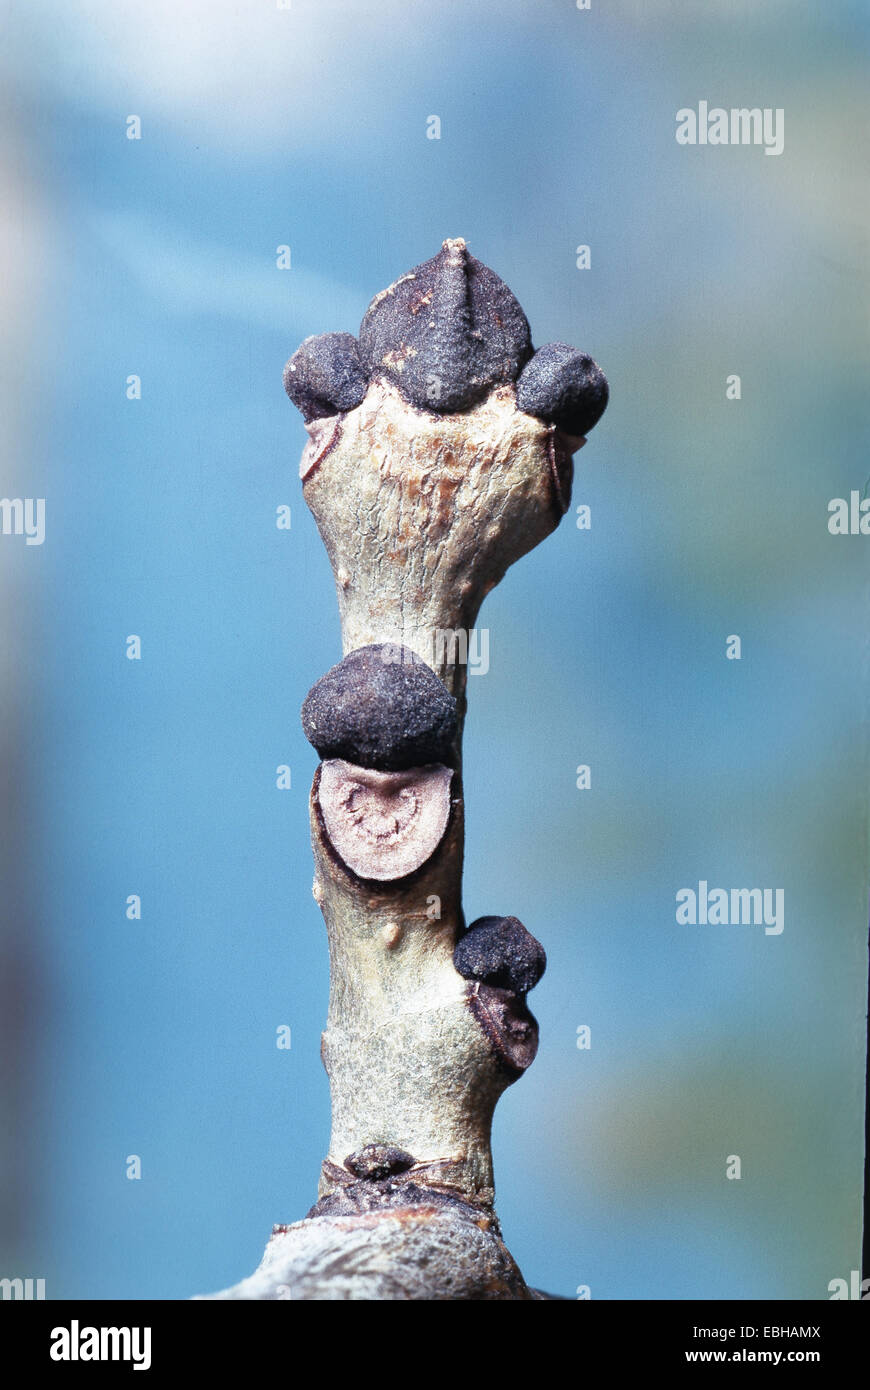 common ash (Fraxinus excelsior), buds. Stock Photo